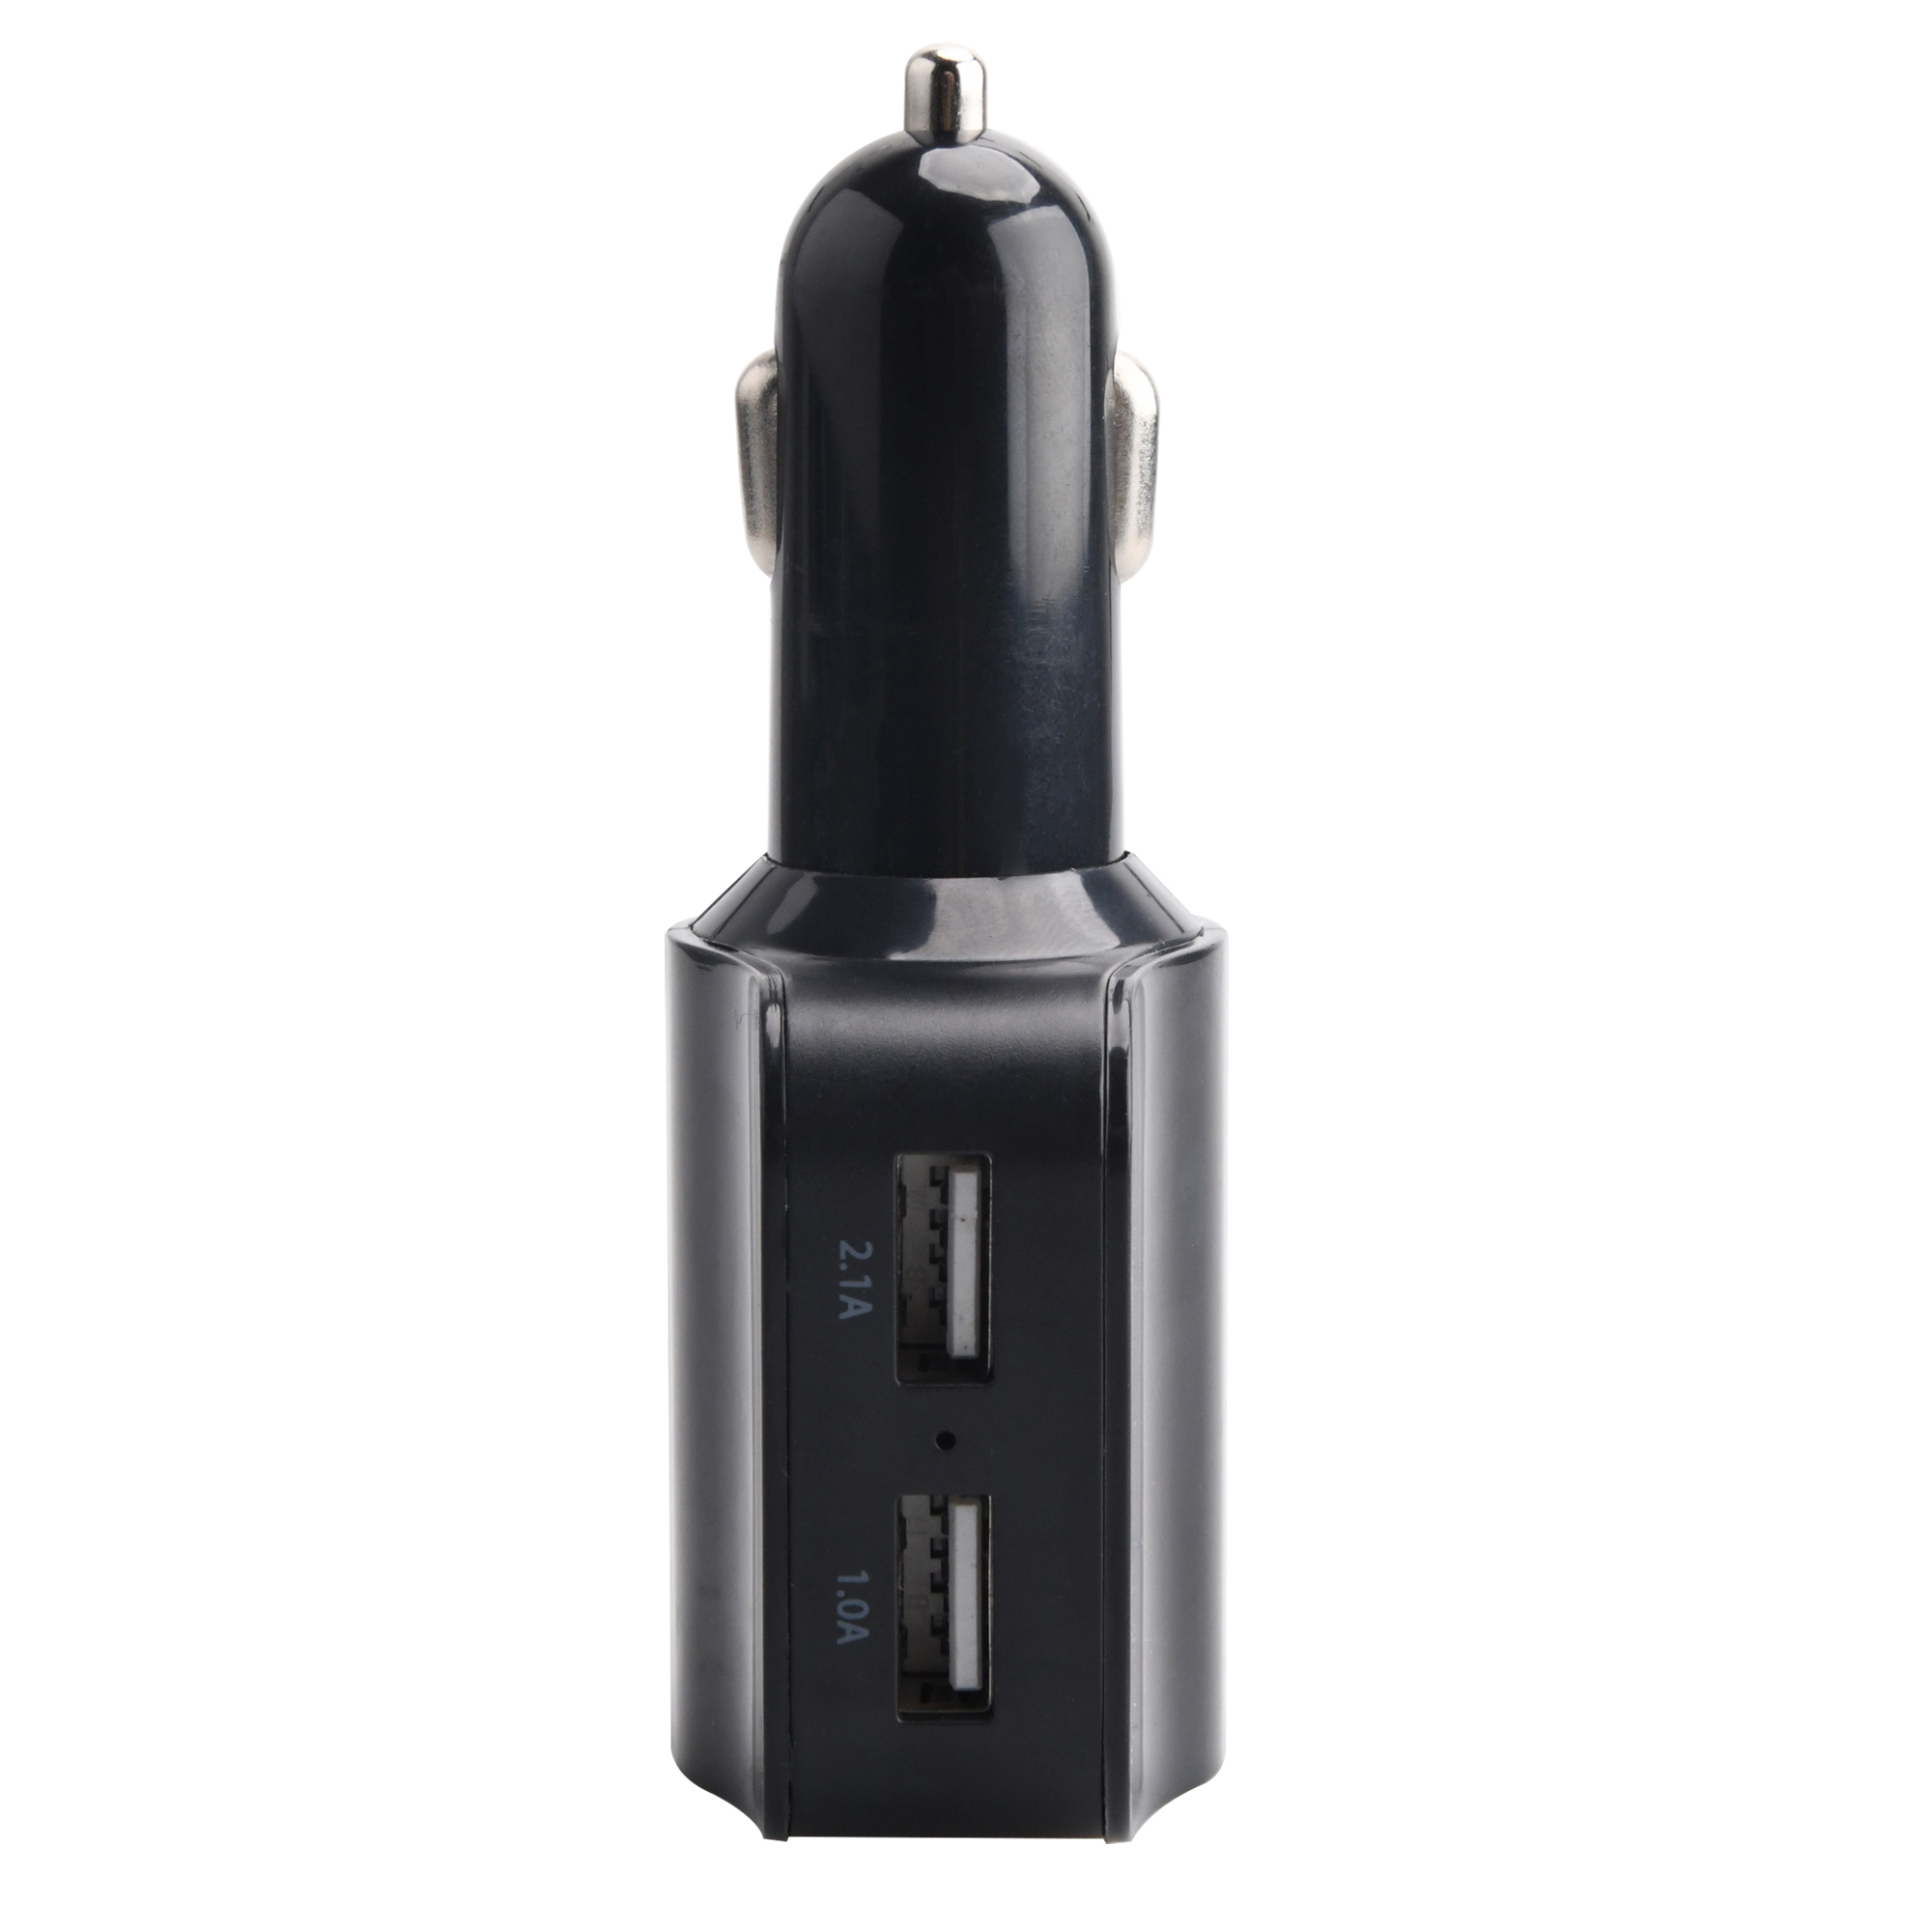 2.1 Amp Car Charger, DC Socket & 2 USB Ports - Armor All